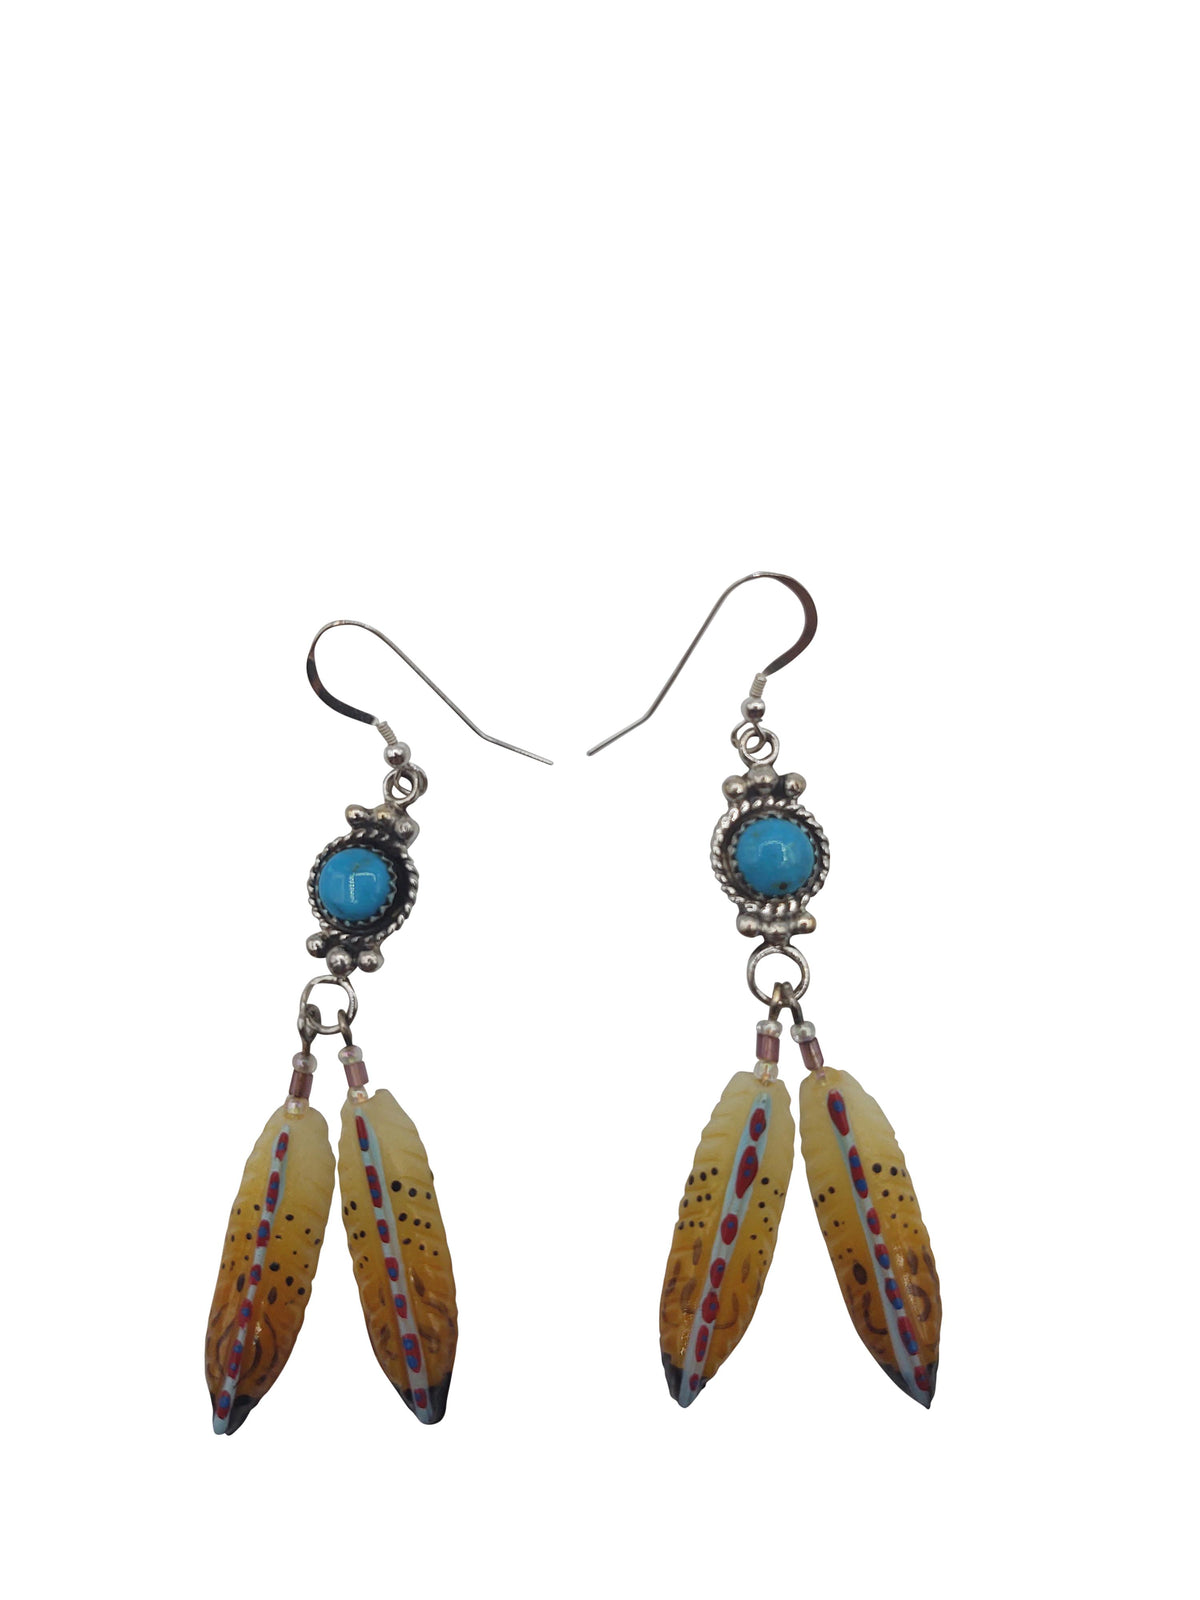 Turquoise Hand Painted Feathers Earrings French Hooks